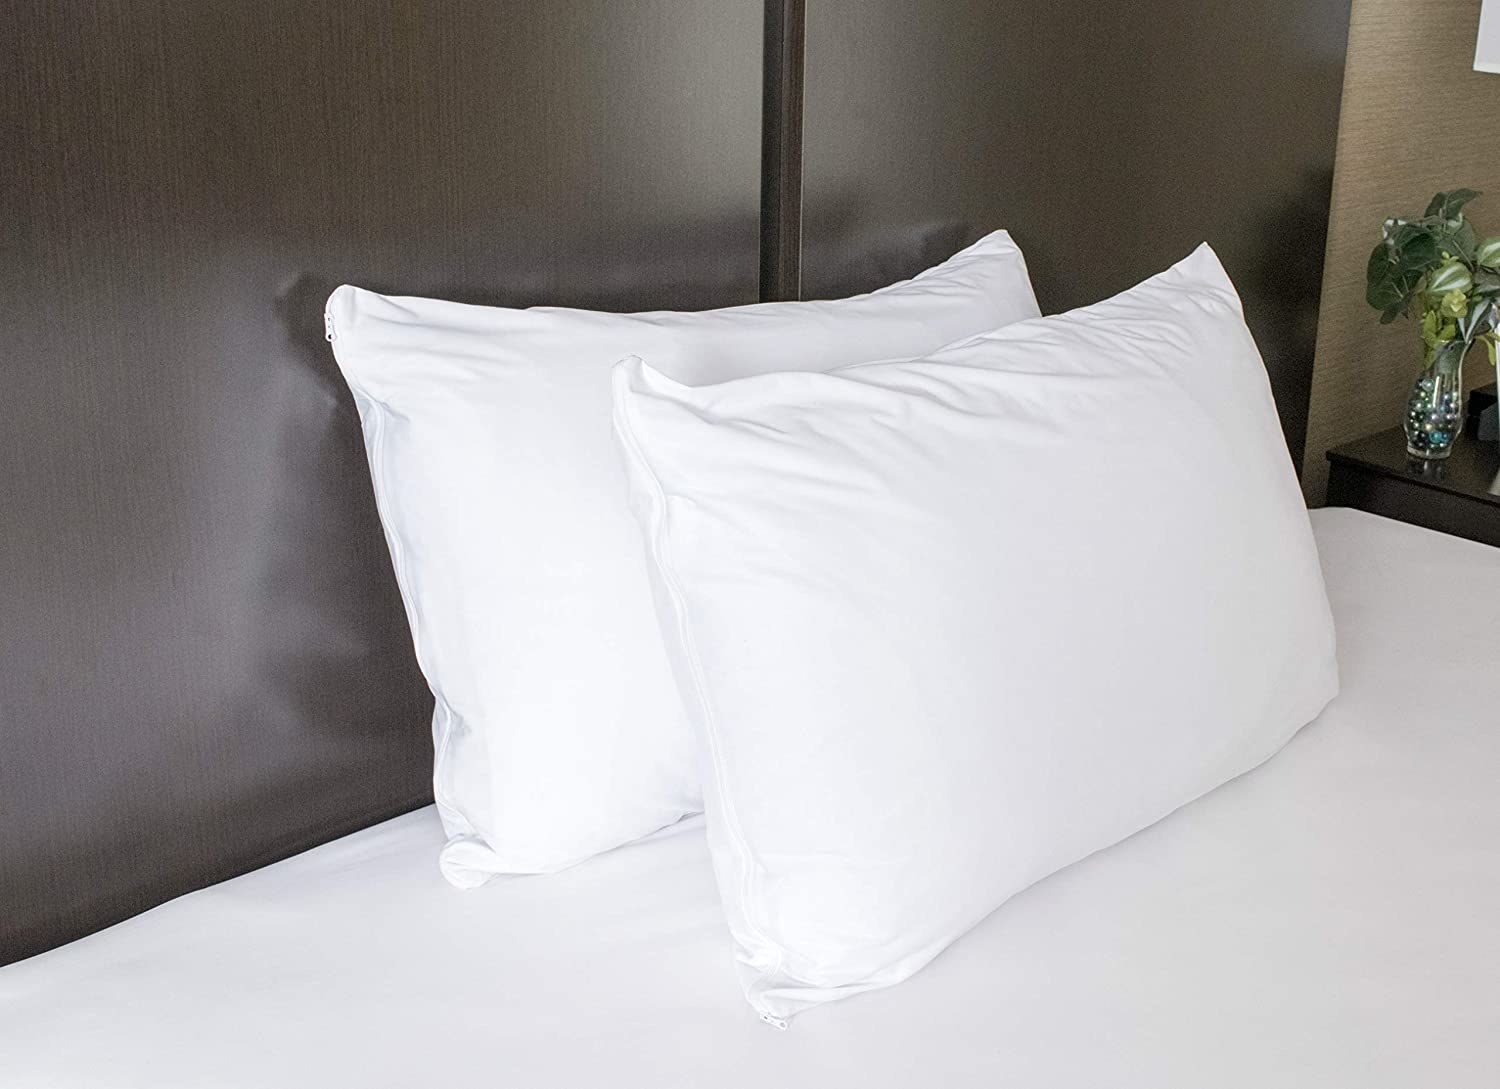 two pillows with pillow covers on them